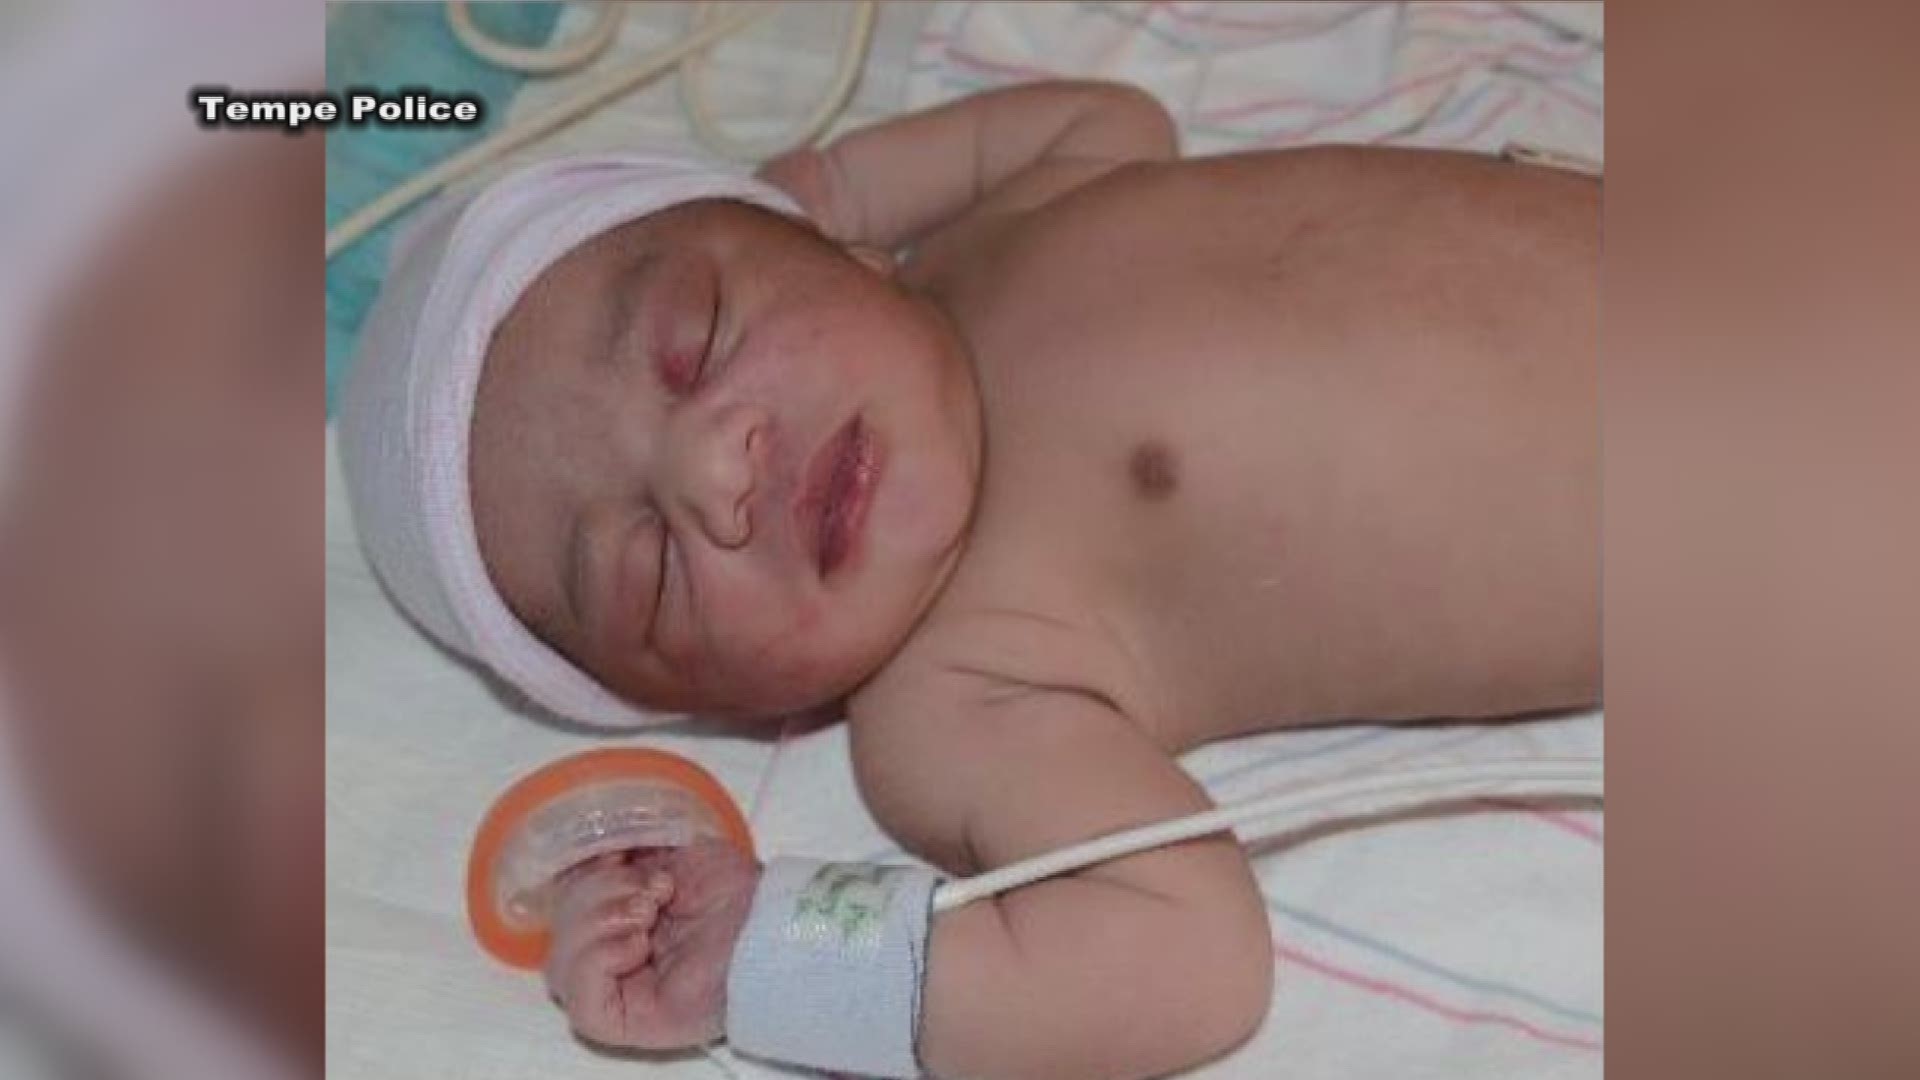 Police are looking for a mother of a newborn that was left outside of a grocery store.